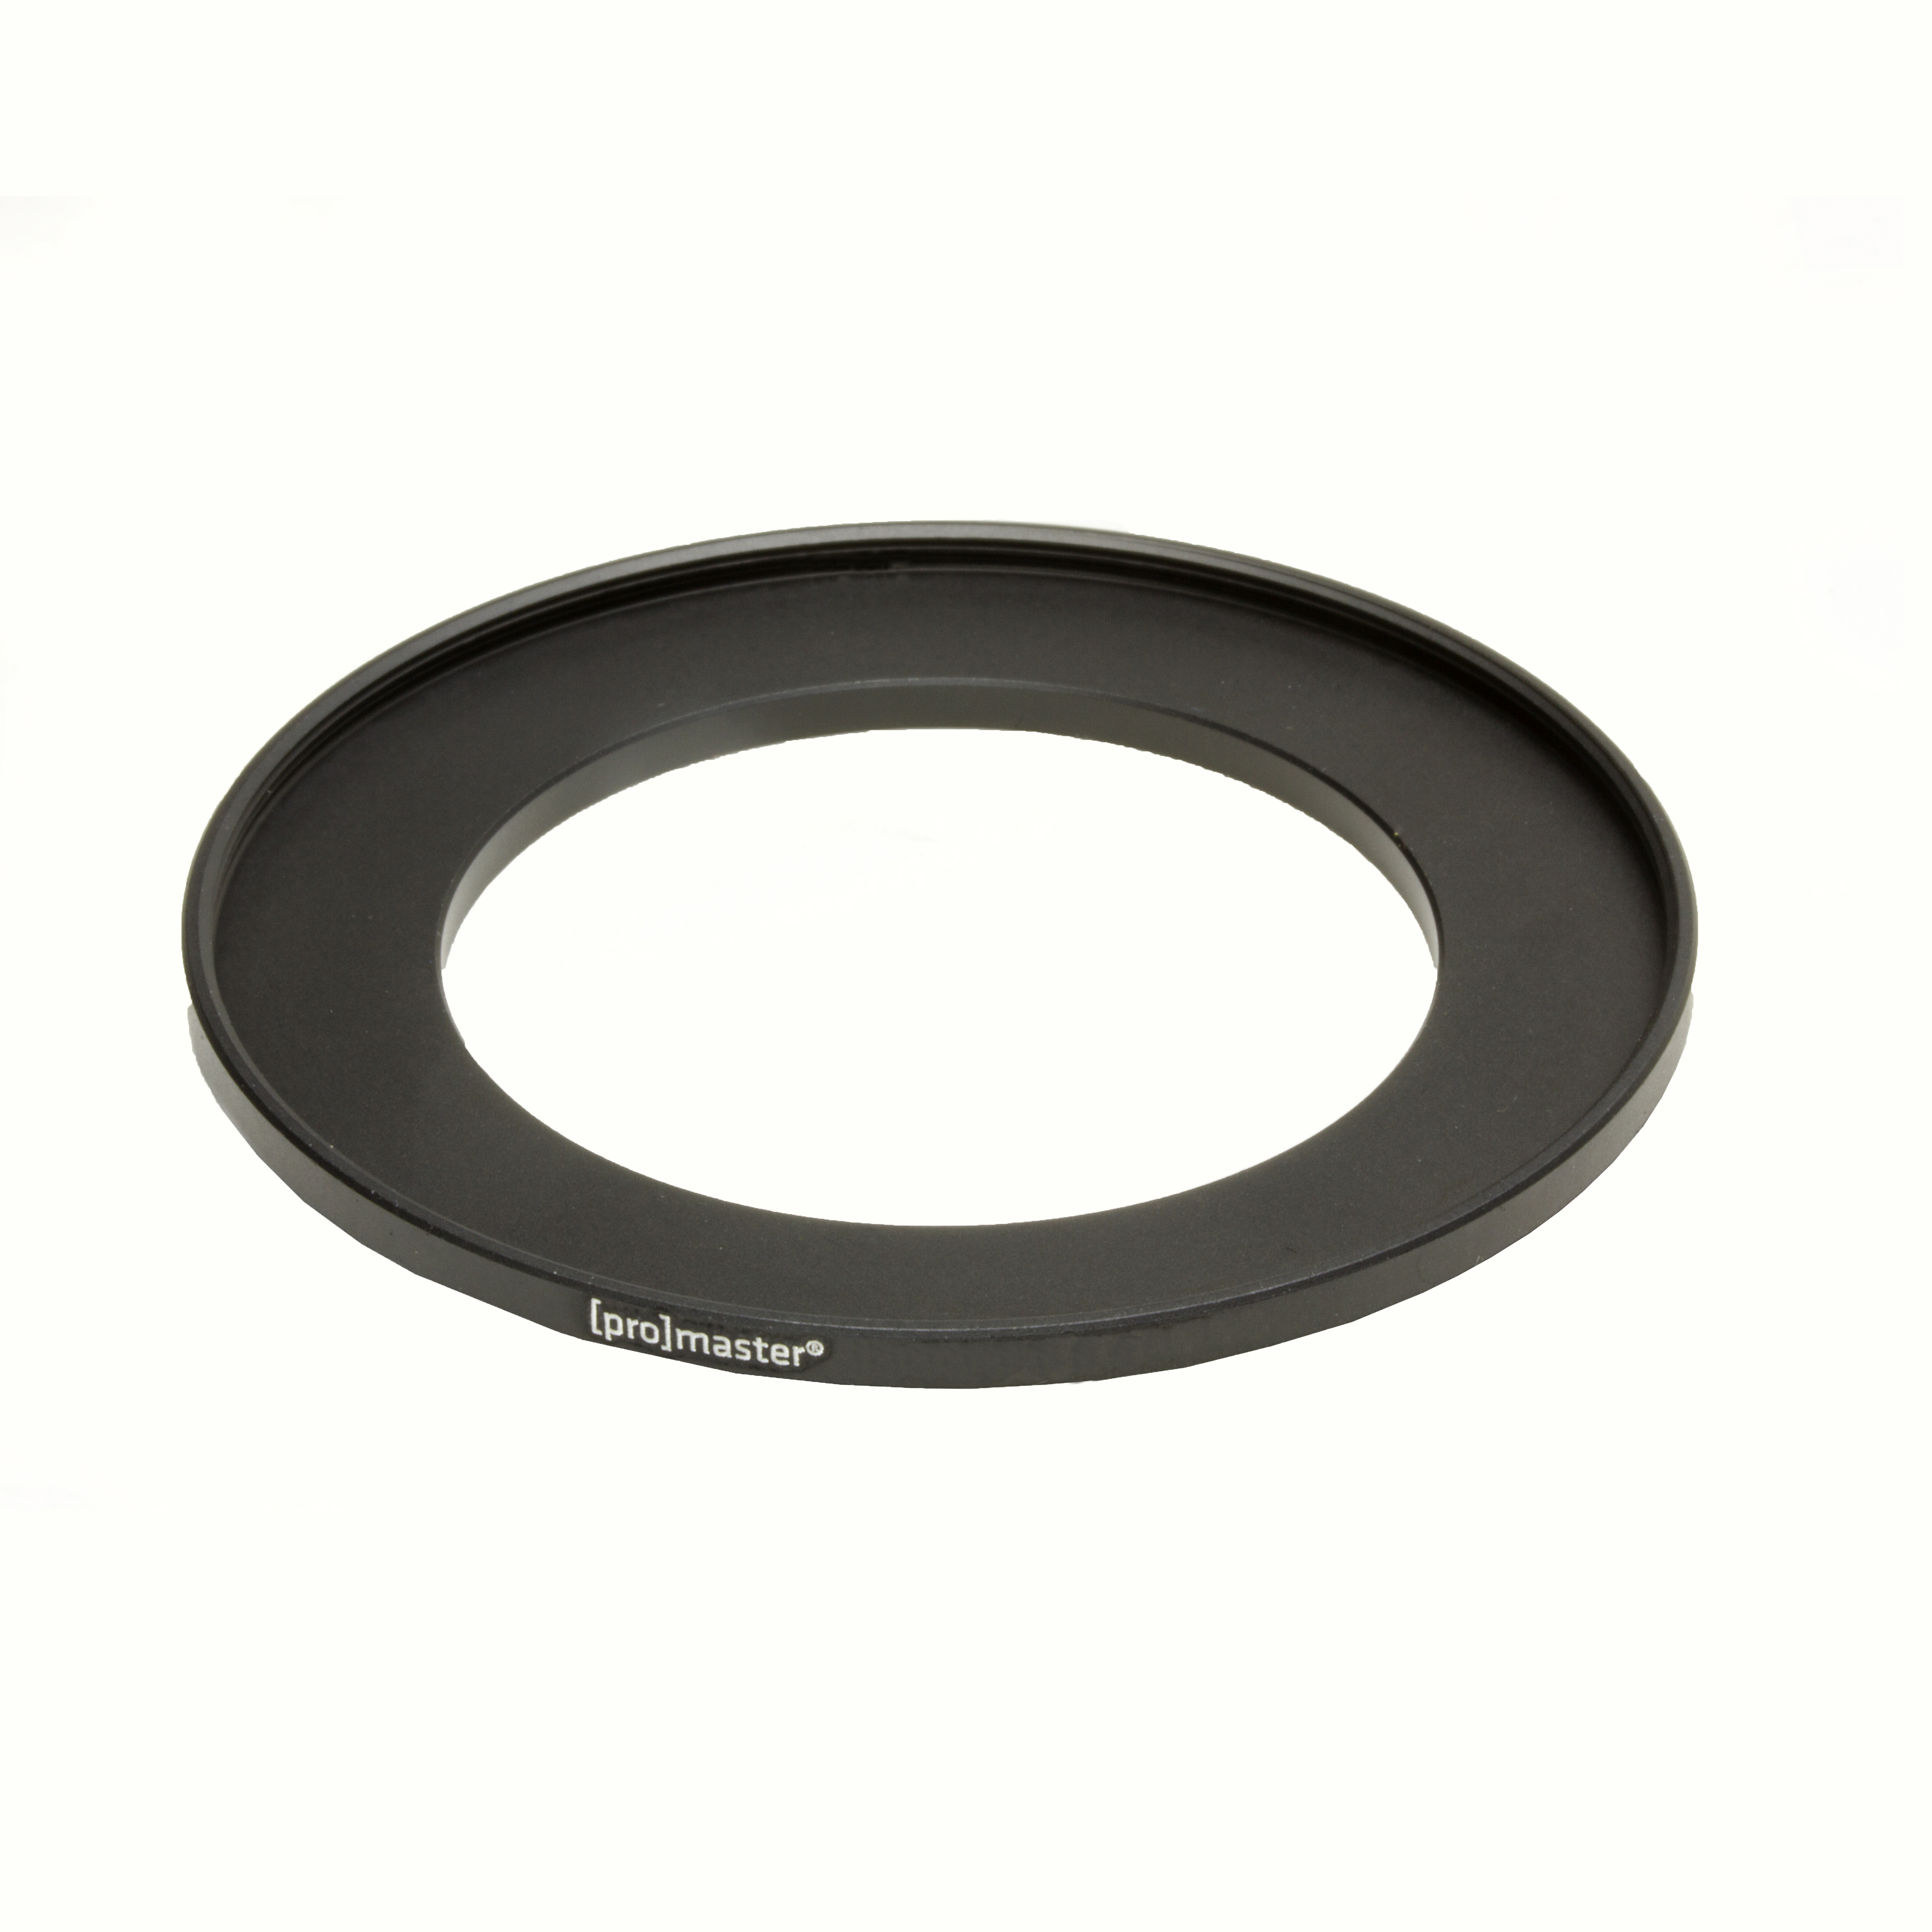 Promaster 5075 62-67mm Step-Up Ring